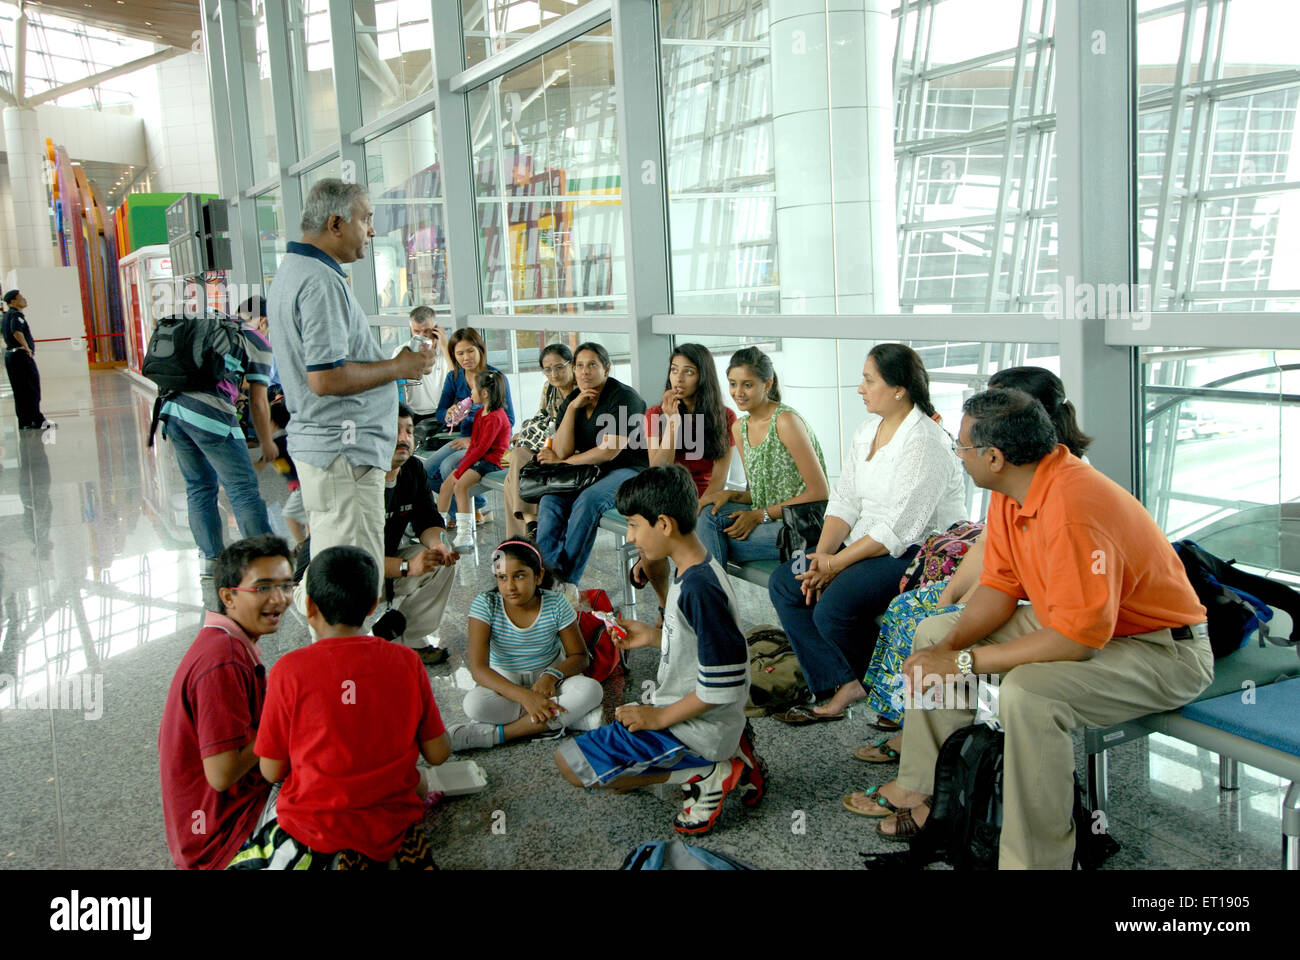 Indian family discussion Kuala Lumpur airport Malaysia - Model Release # 364 Stock Photo